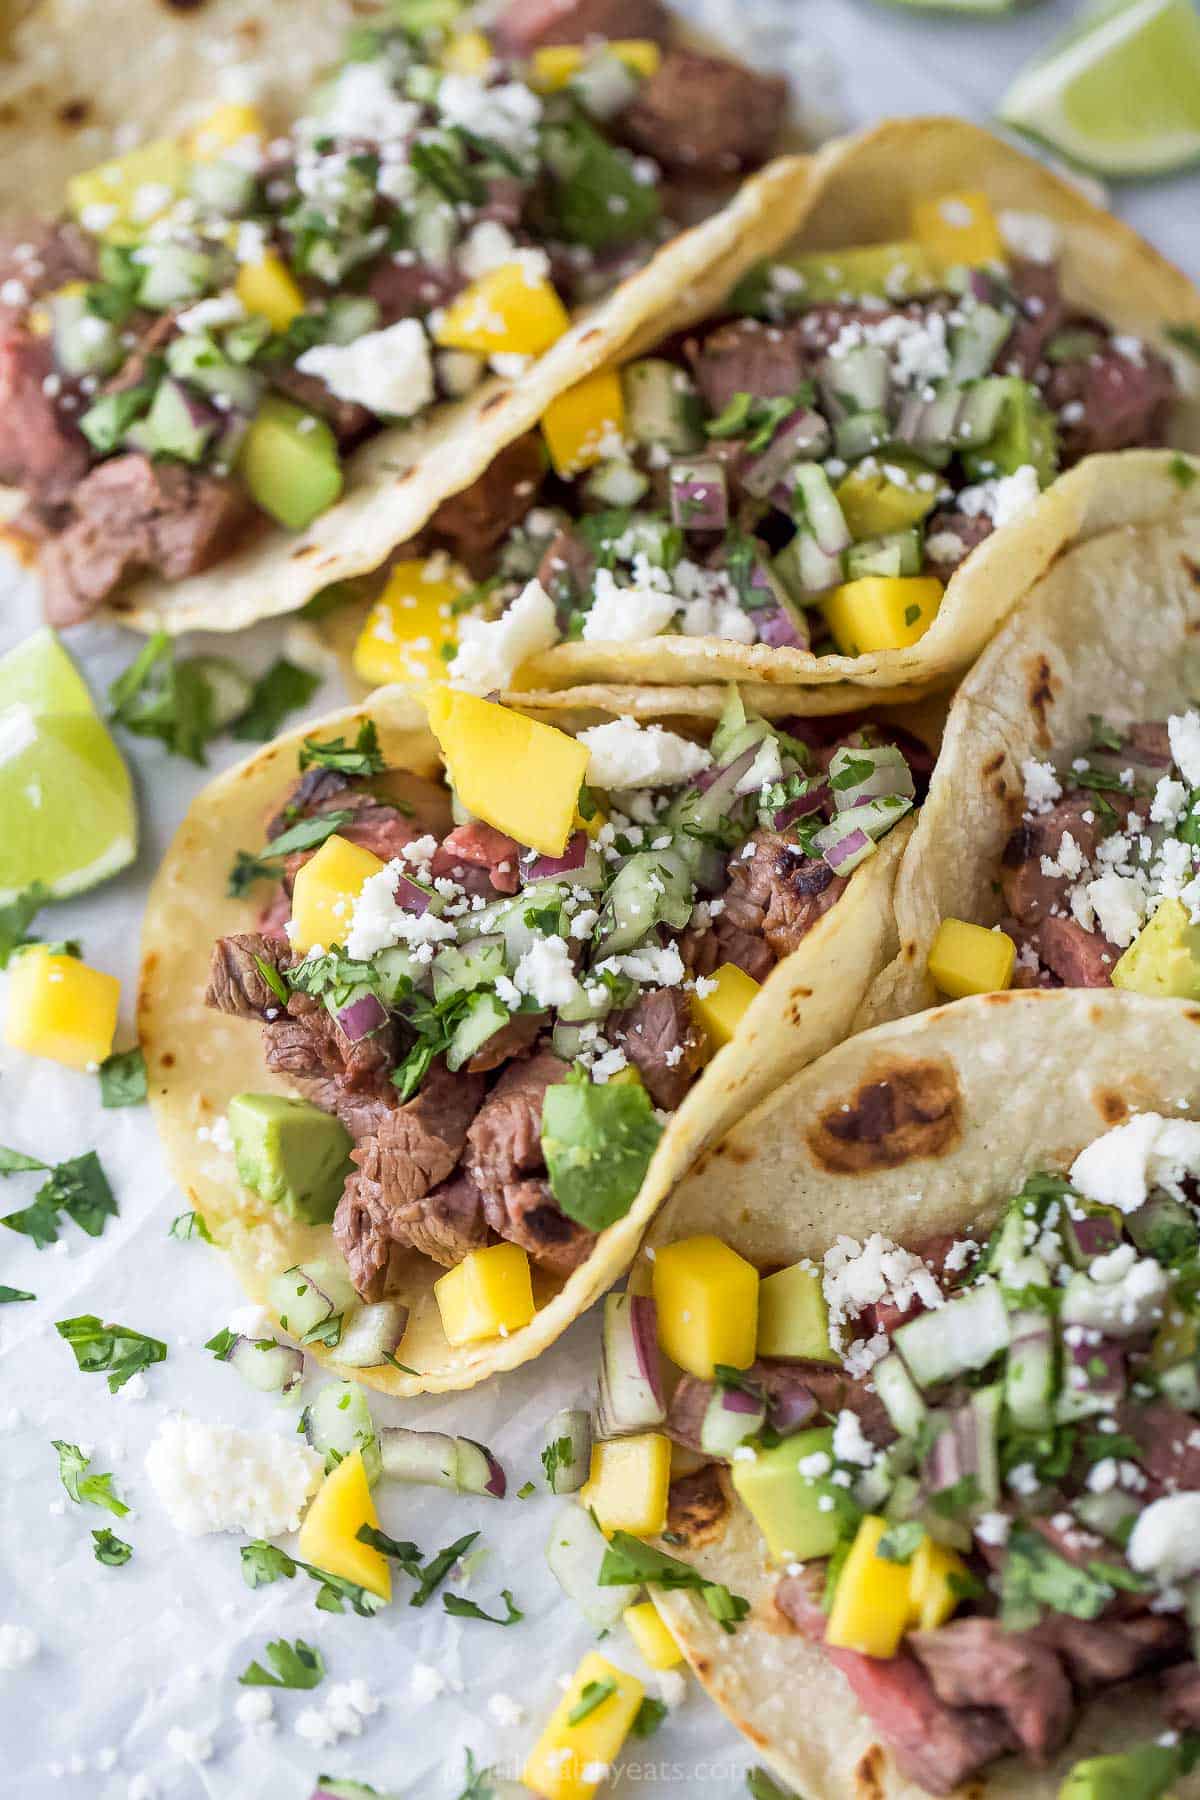 Three street tacos on a parchment-lined tray.